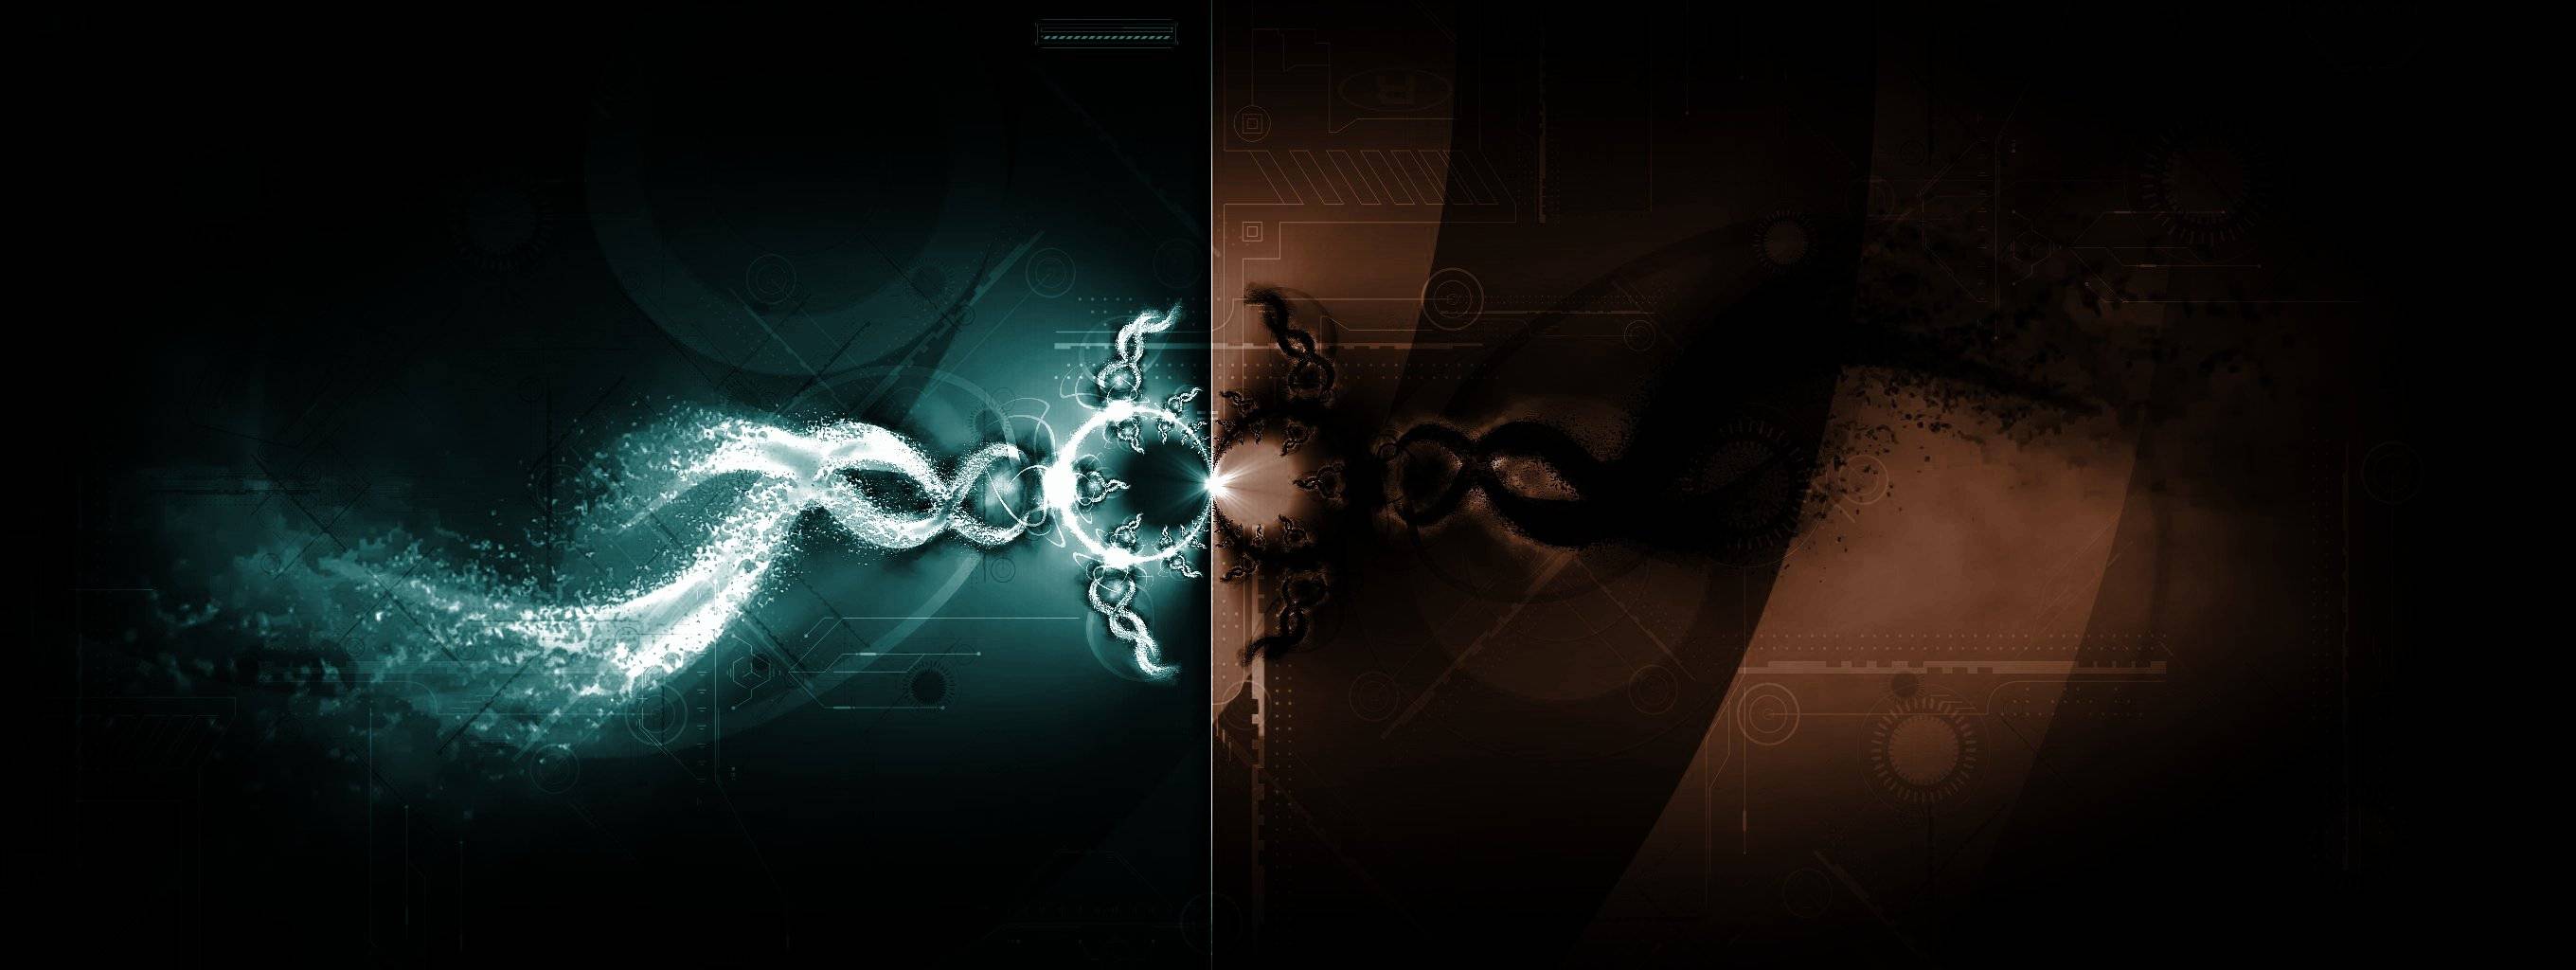 Dual monitor walls wallpaper - (#6743) - High Quality and ...